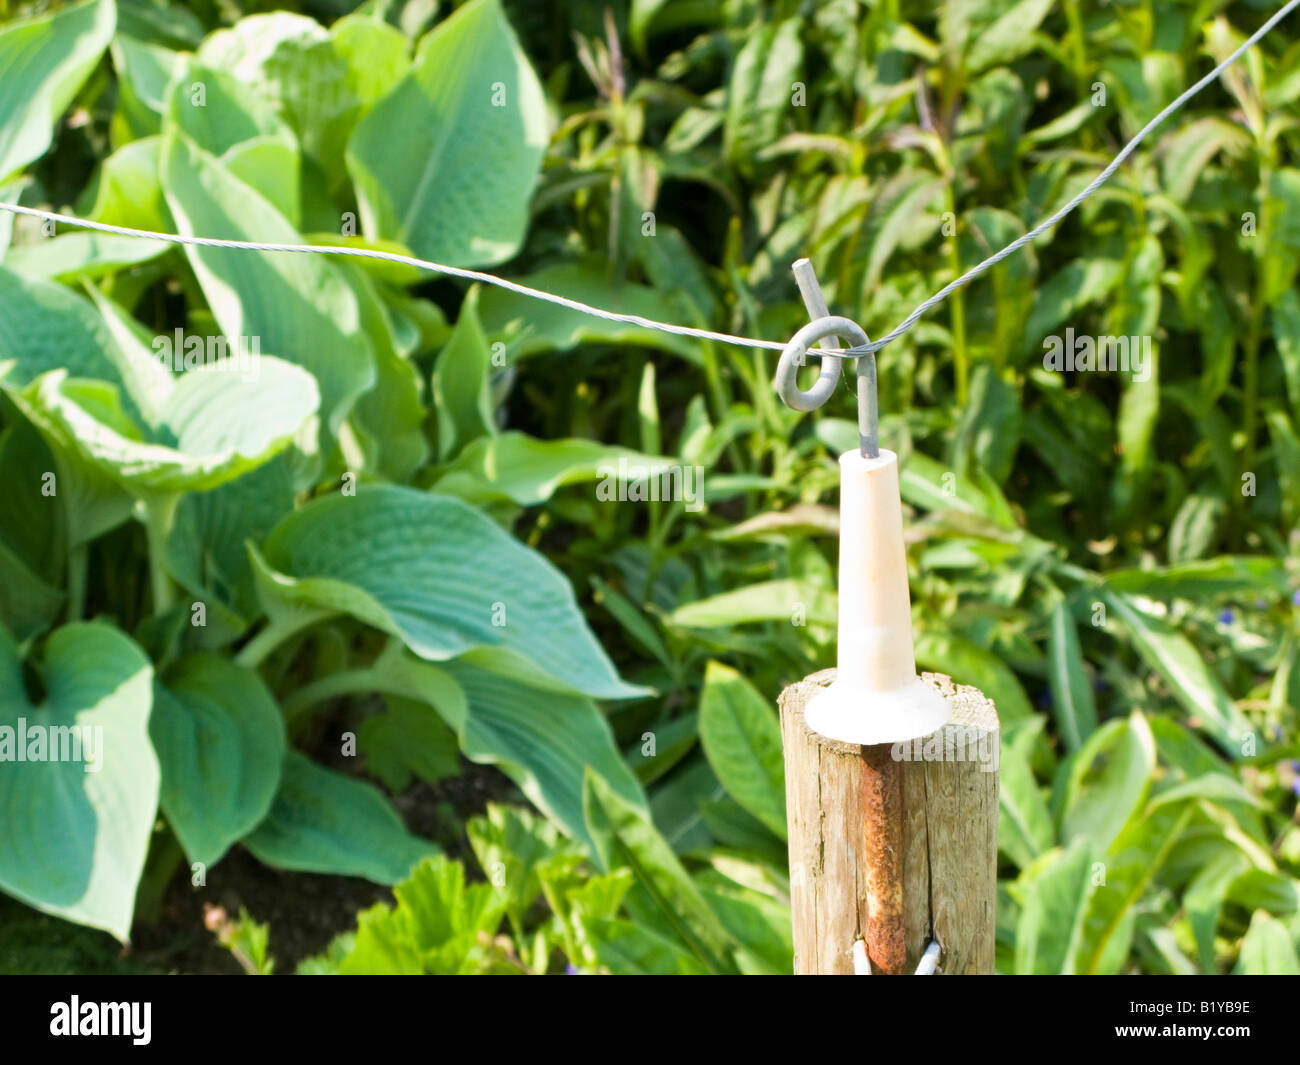 Electric fence around flower bed to prevent deer damage Stock Photo